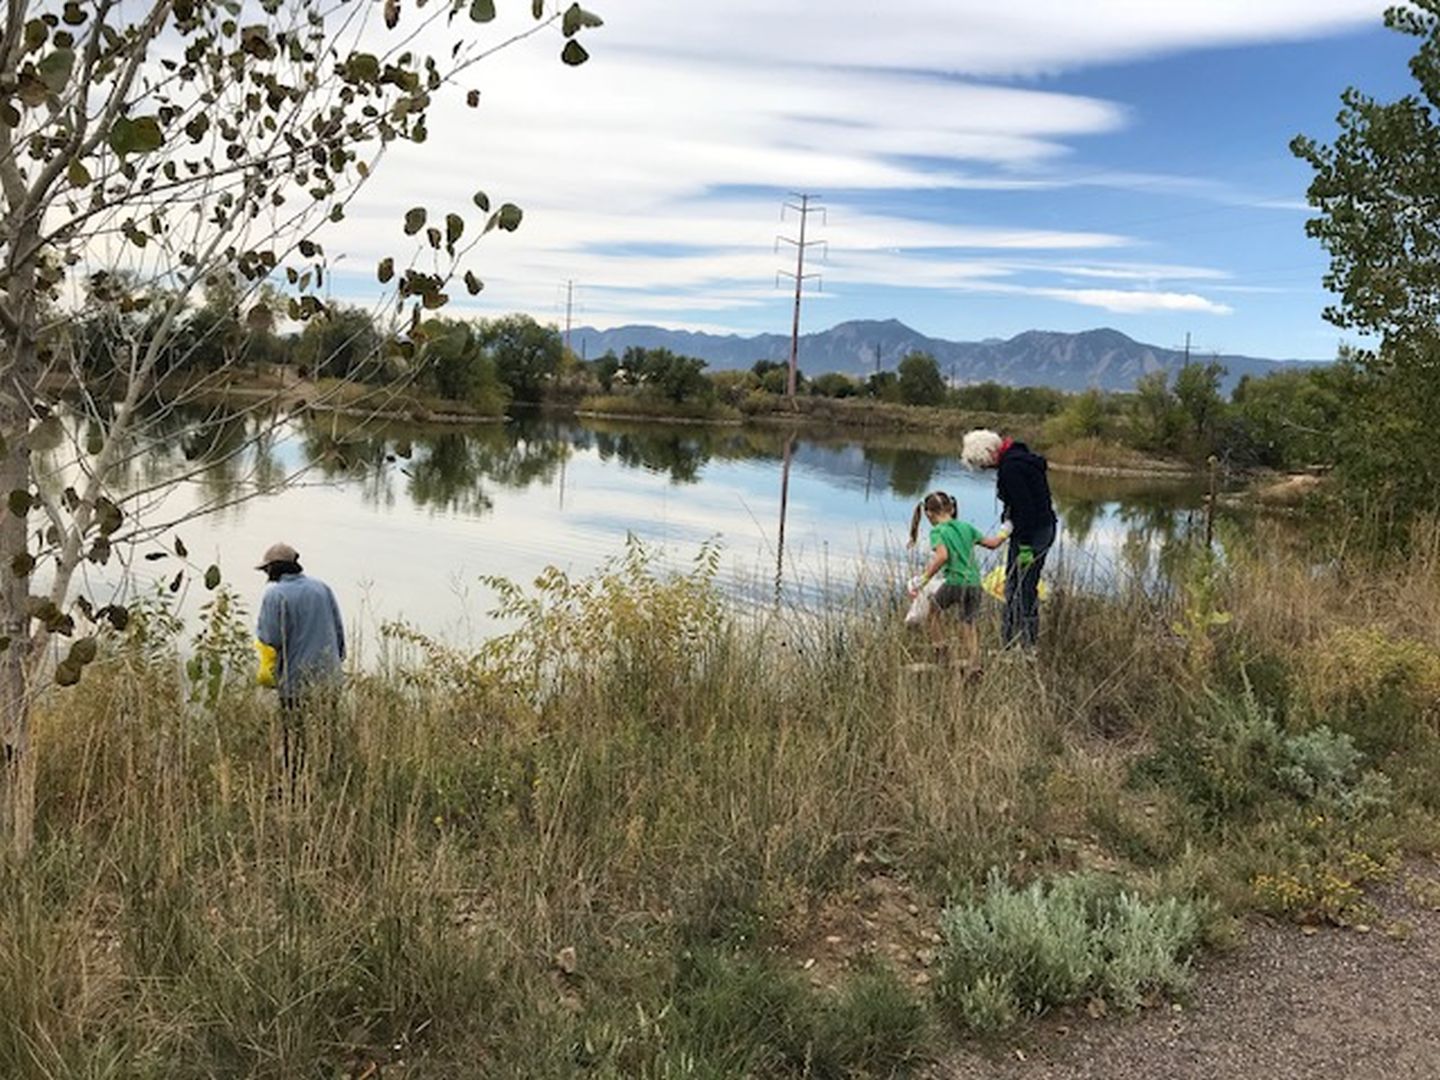 Three people looking for trash along the shoreline of a pond